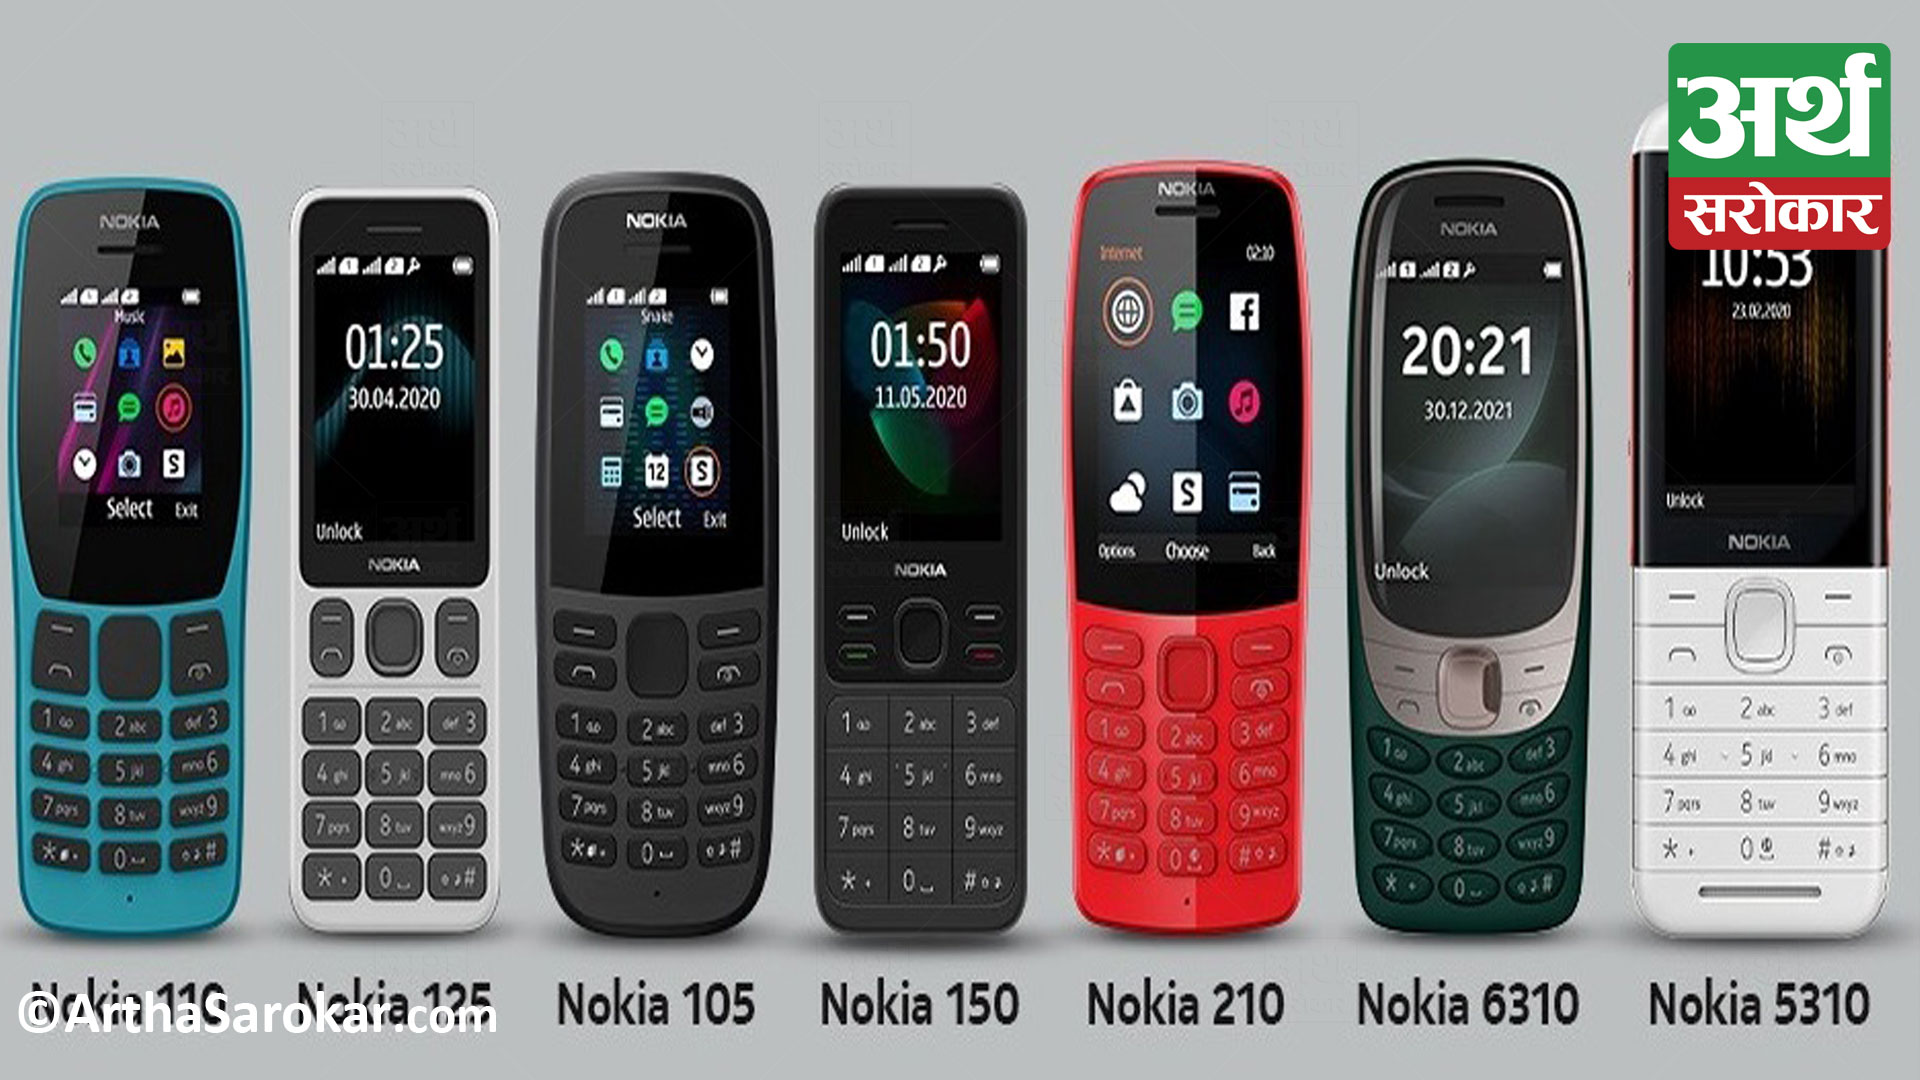 HMD Global, the home of Nokia phones announces ‘365 Days Replacement Warranty’ on bar phones